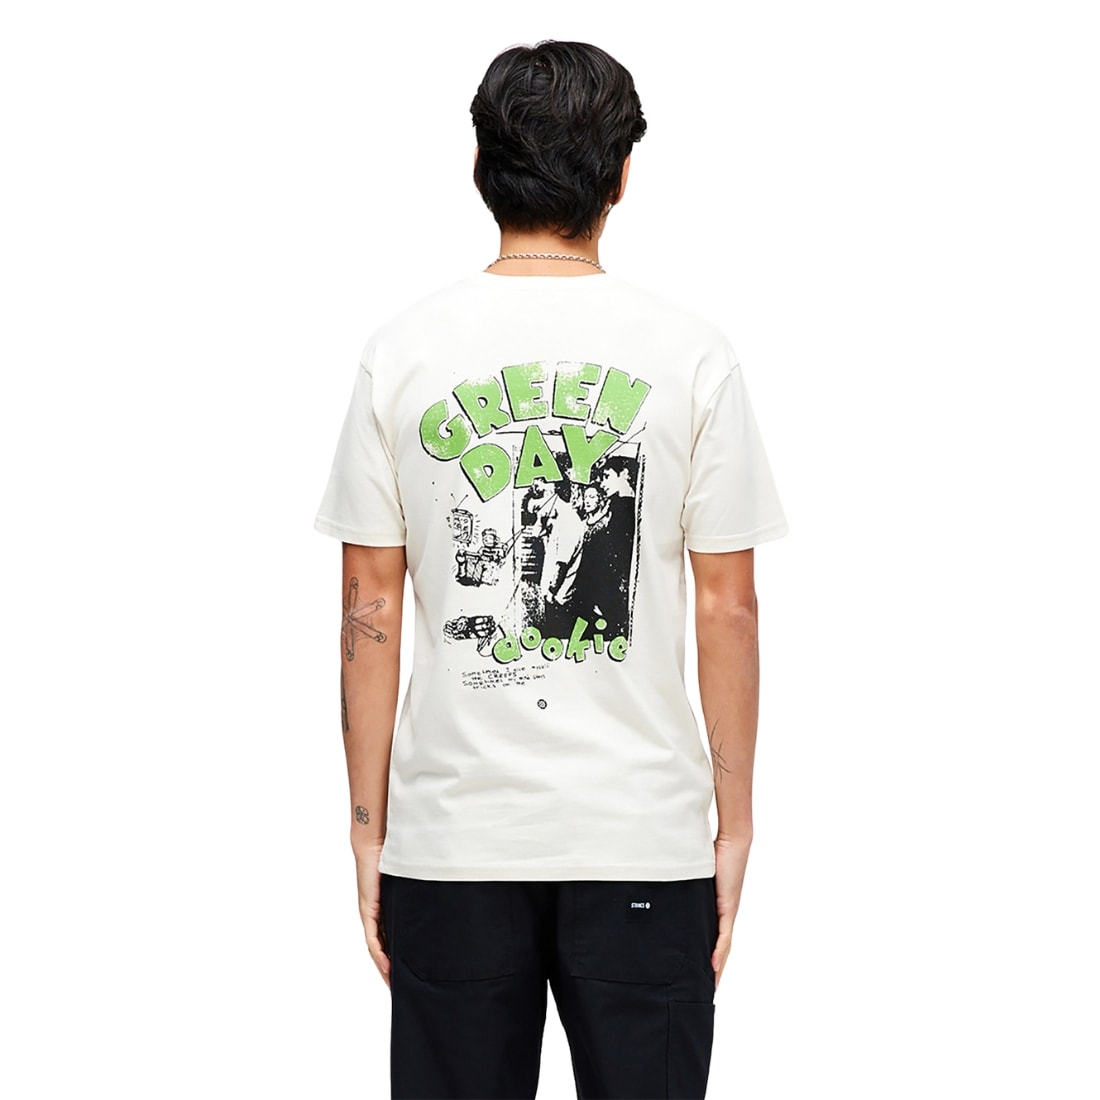 Stance X Greenday 1994 T-Shirt - Vintage White - Mens Graphic T-Shirt by Stance